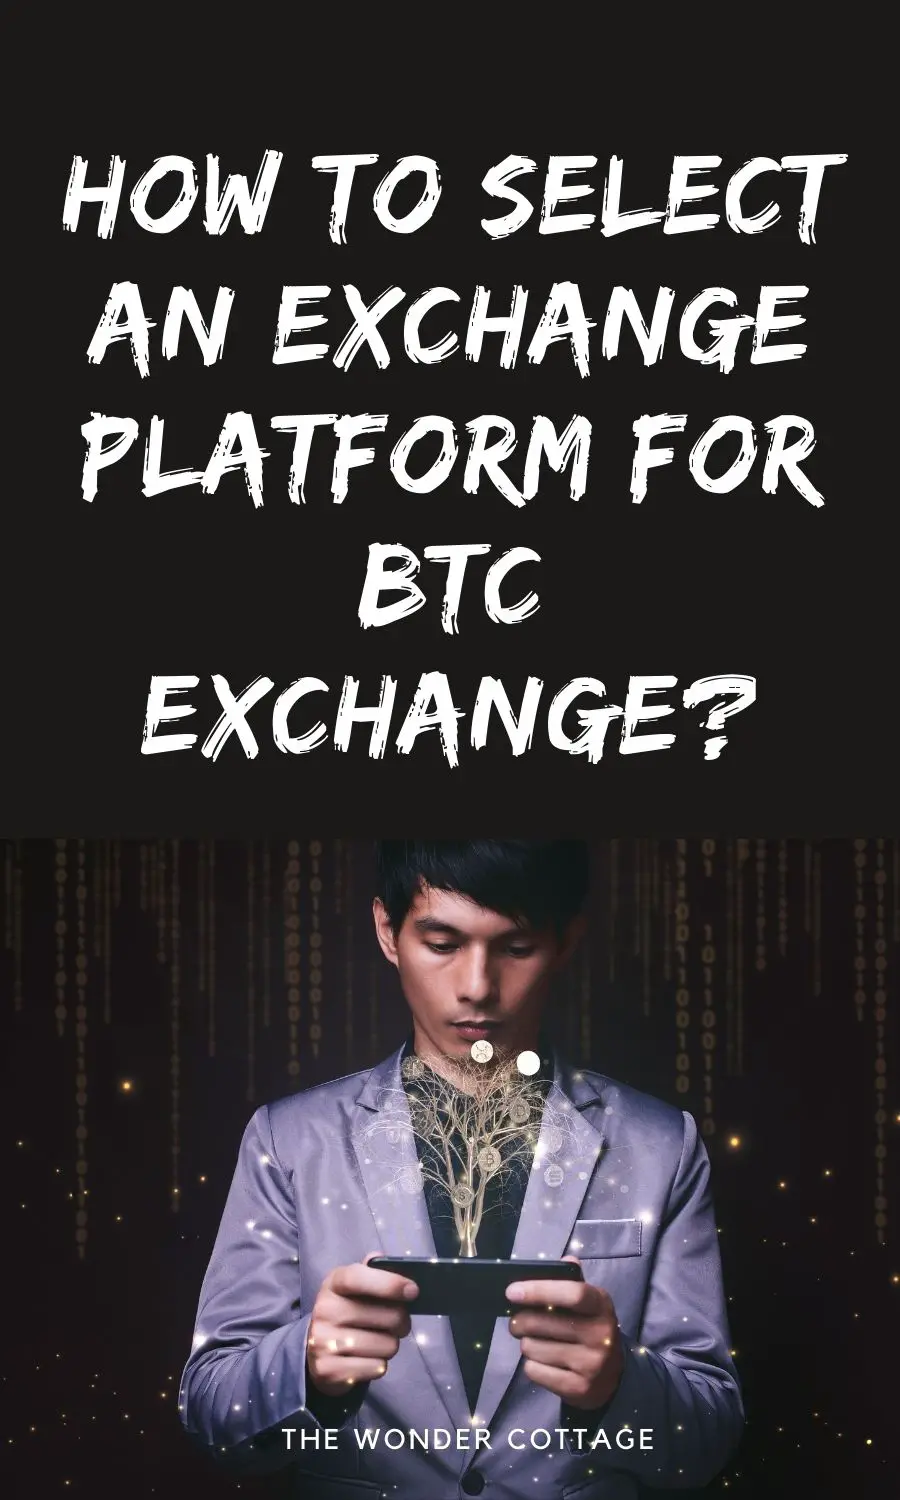 How To Select An Exchange Platform For BTC Exchange?